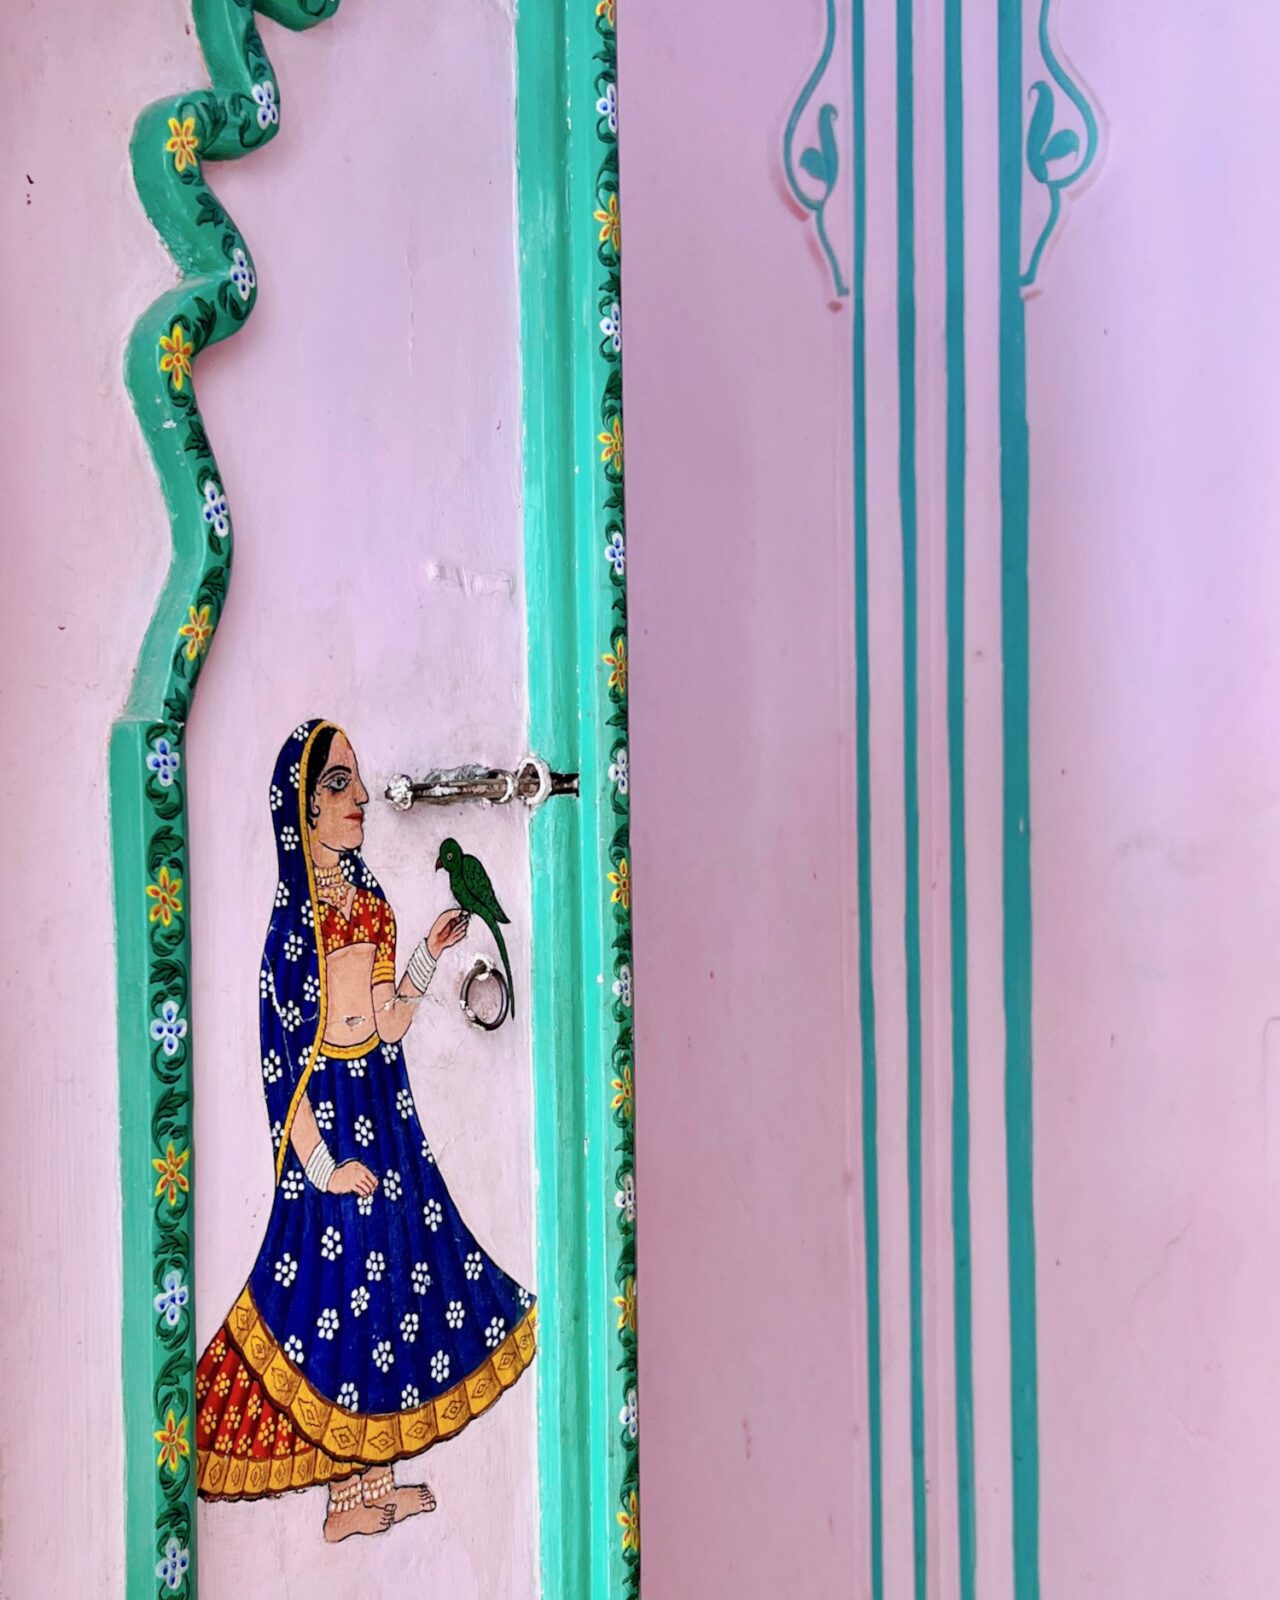 Udaipur Luxury Travel Guide | Rajasthan | India | Molly Carr Photography | Udaipur City Palace